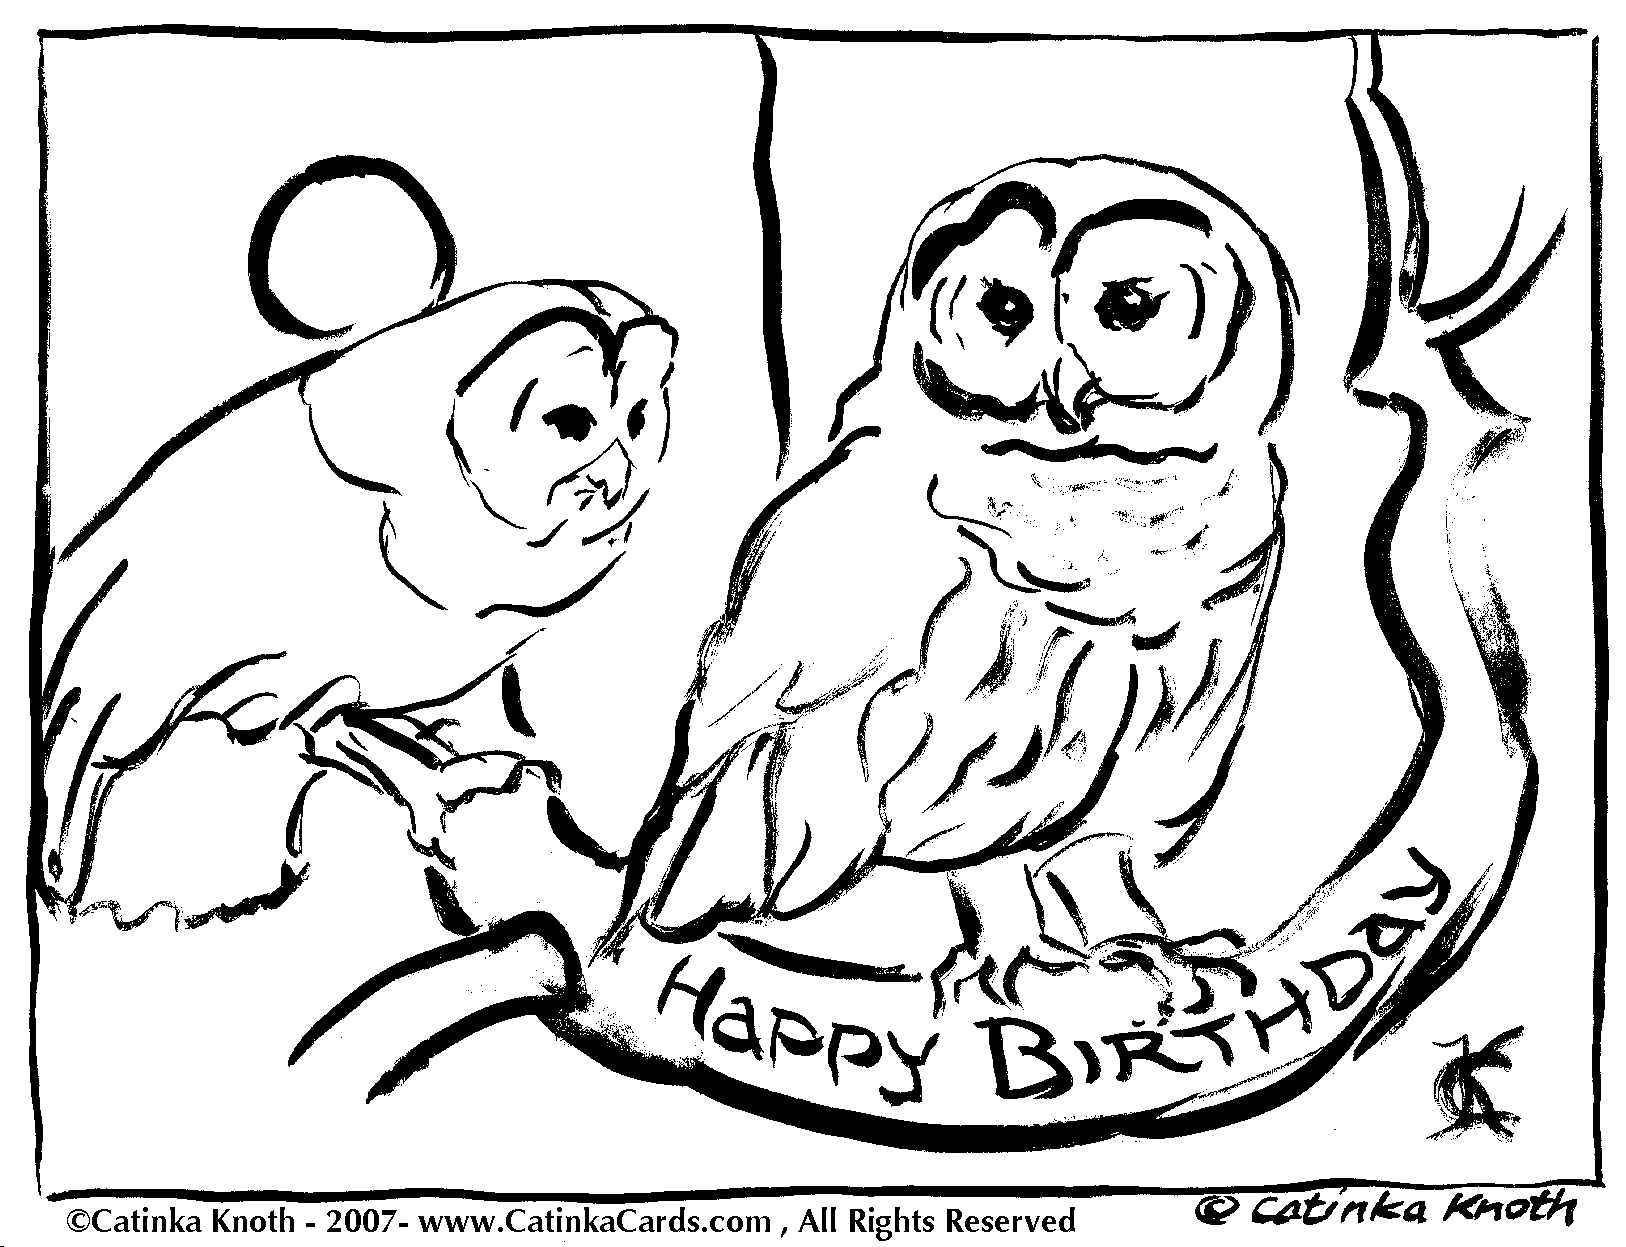 Coloring page: Owl (Animals) #8582 - Free Printable Coloring Pages